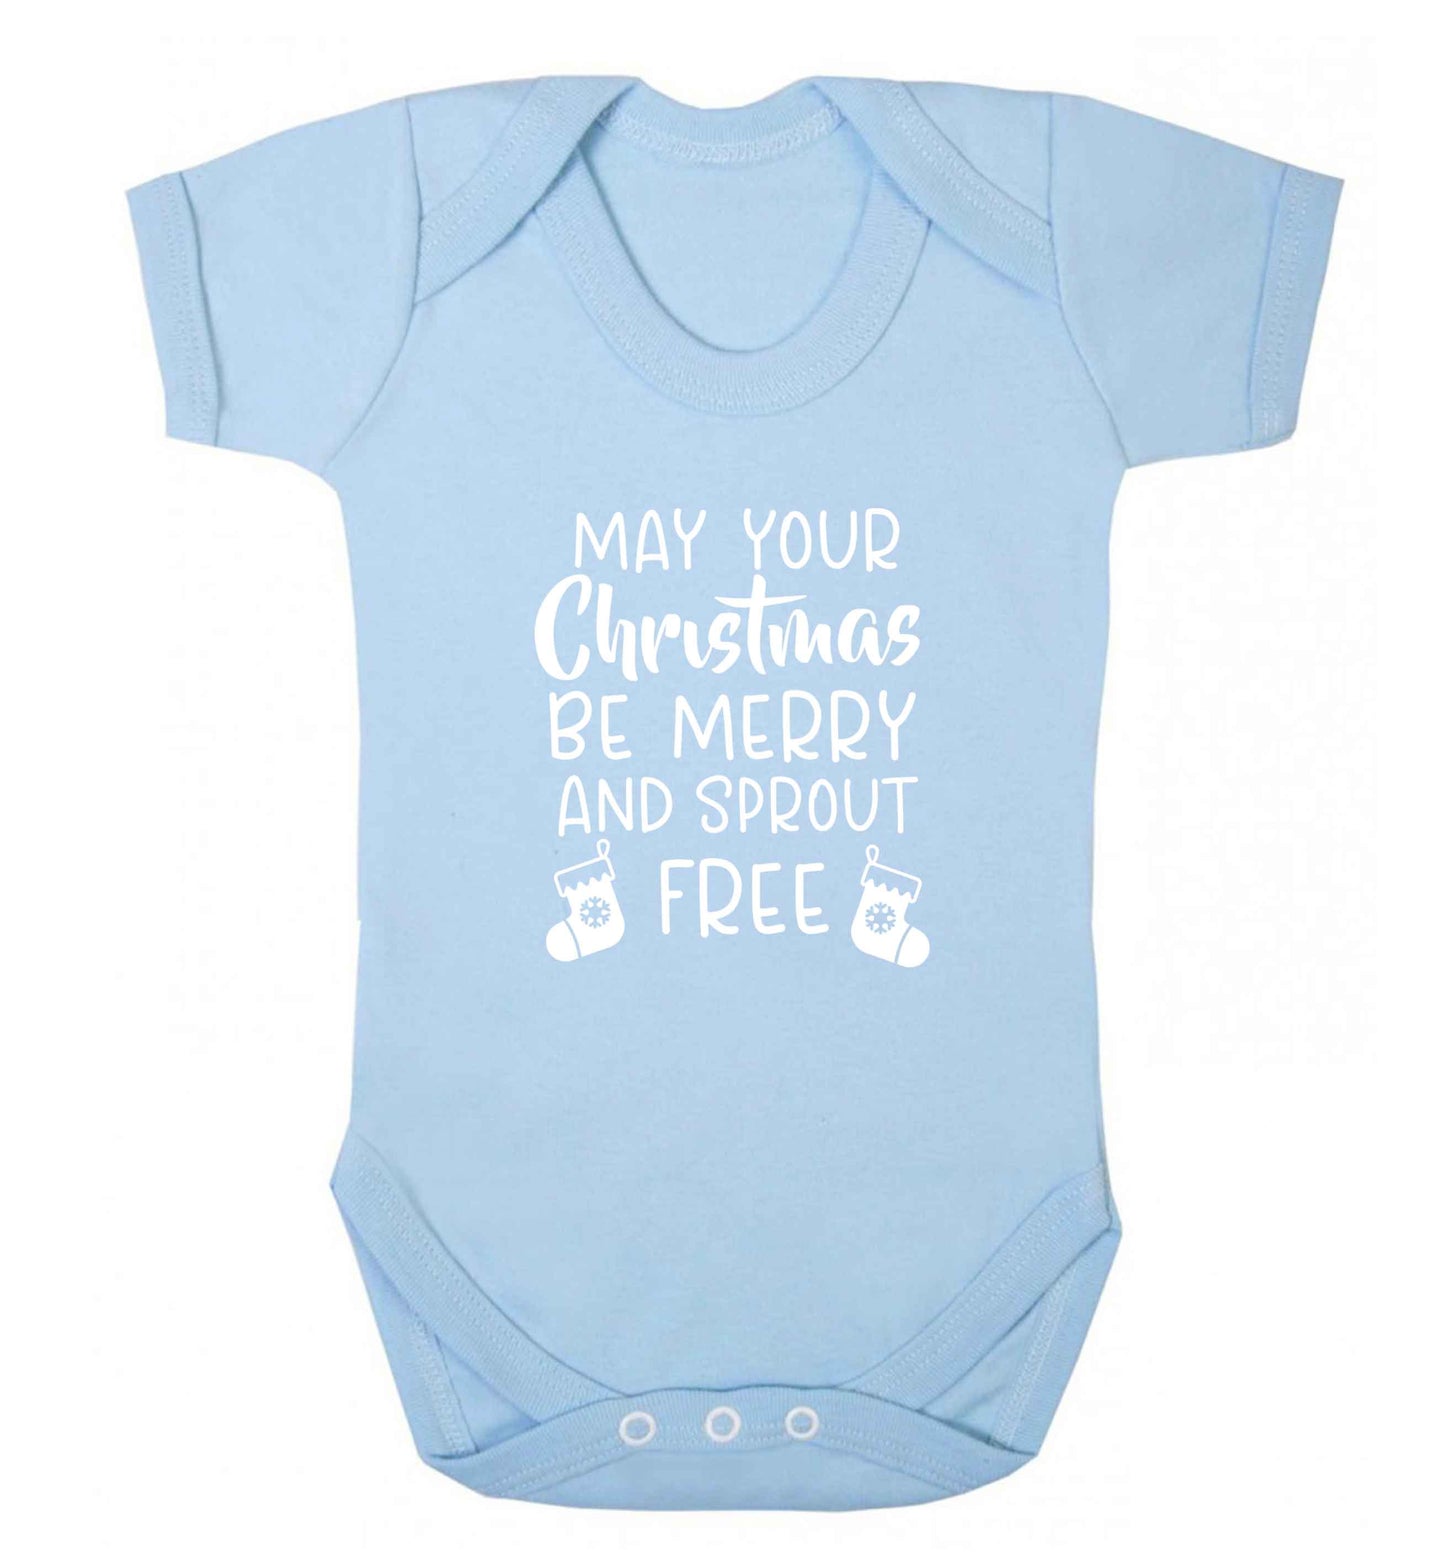 May your Christmas be merry and sprout free baby vest pale blue 18-24 months